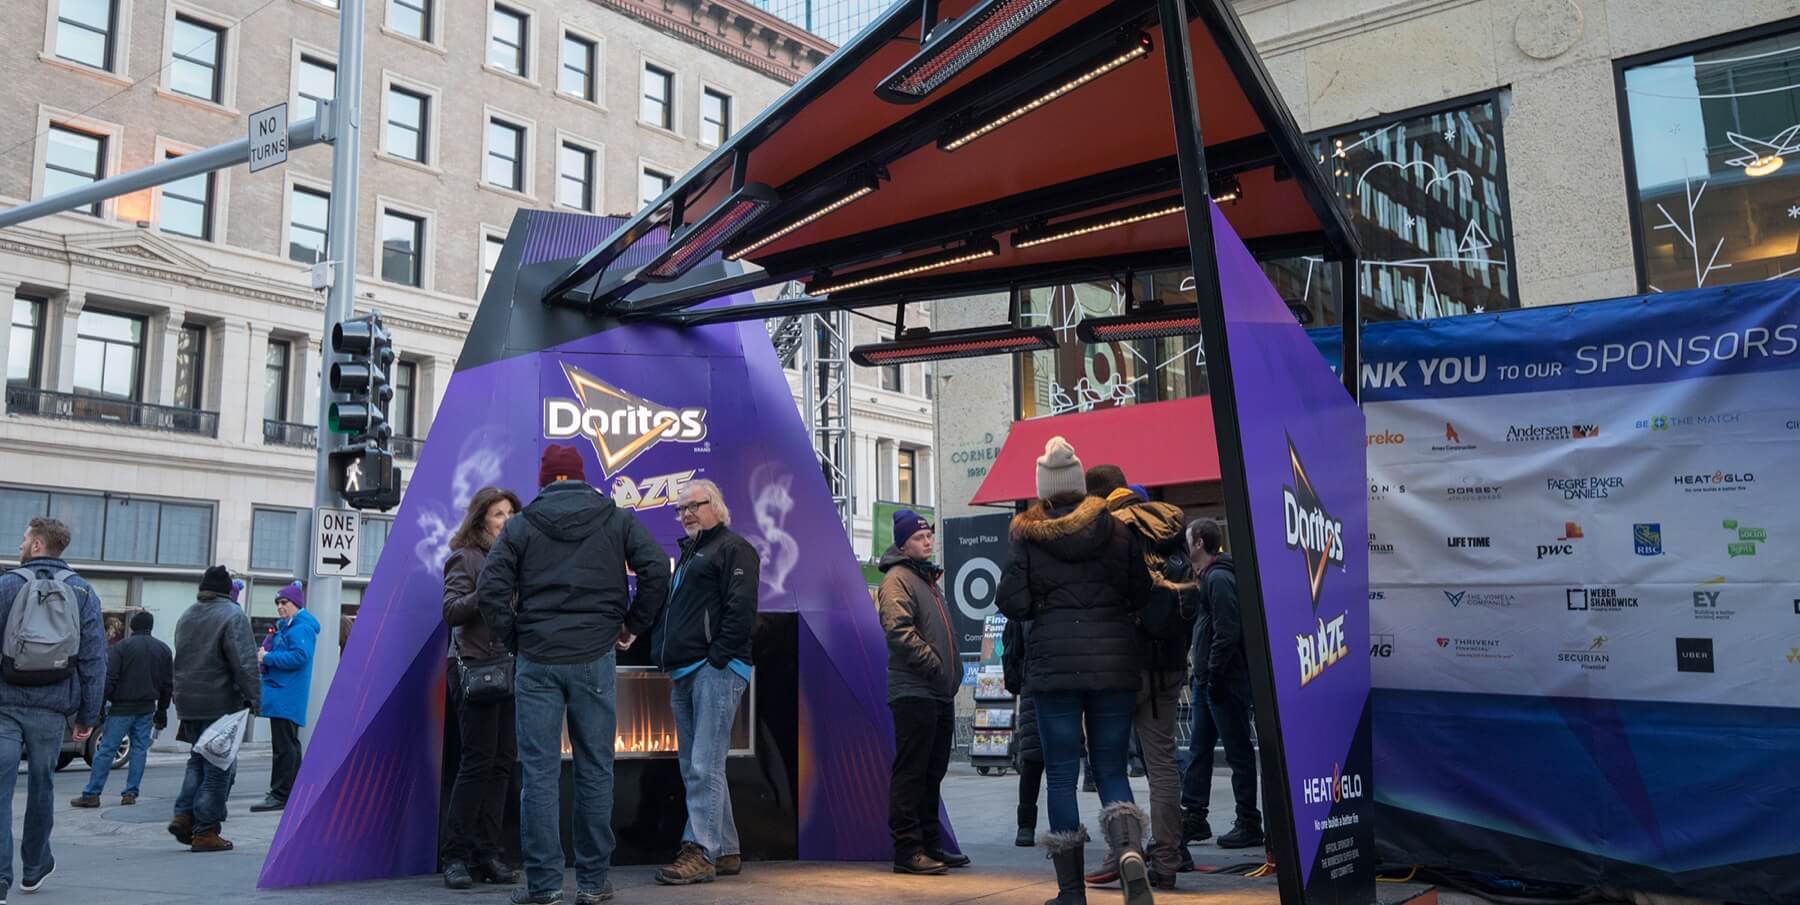 Doritos being marketed from within a tent on a streetside